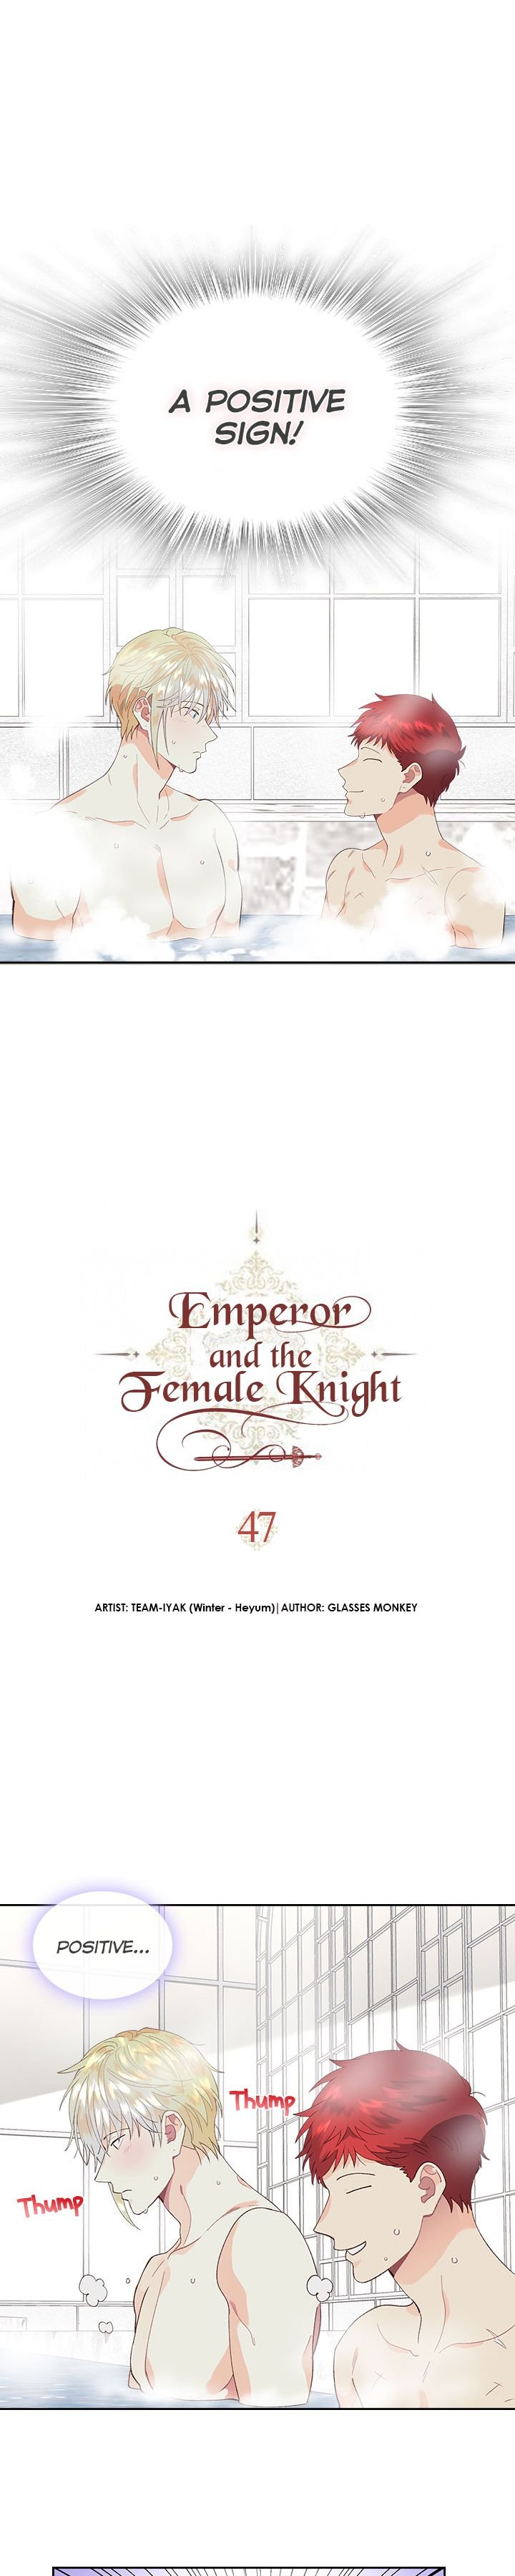 emperor-and-the-female-knight-chap-47-0